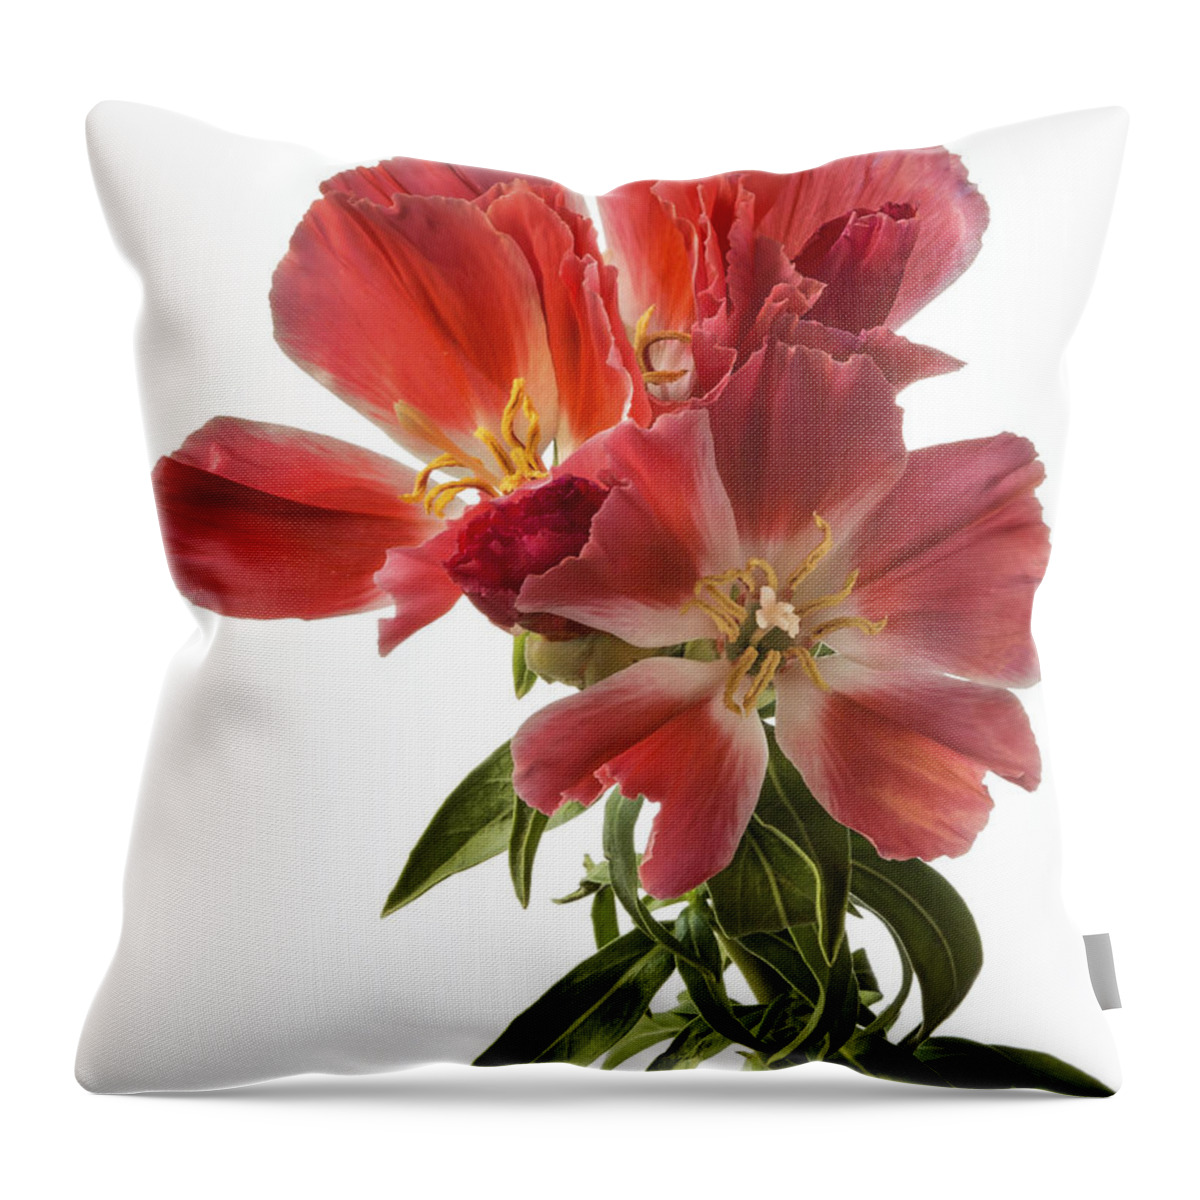 Flower Throw Pillow featuring the photograph Godacia by Endre Balogh